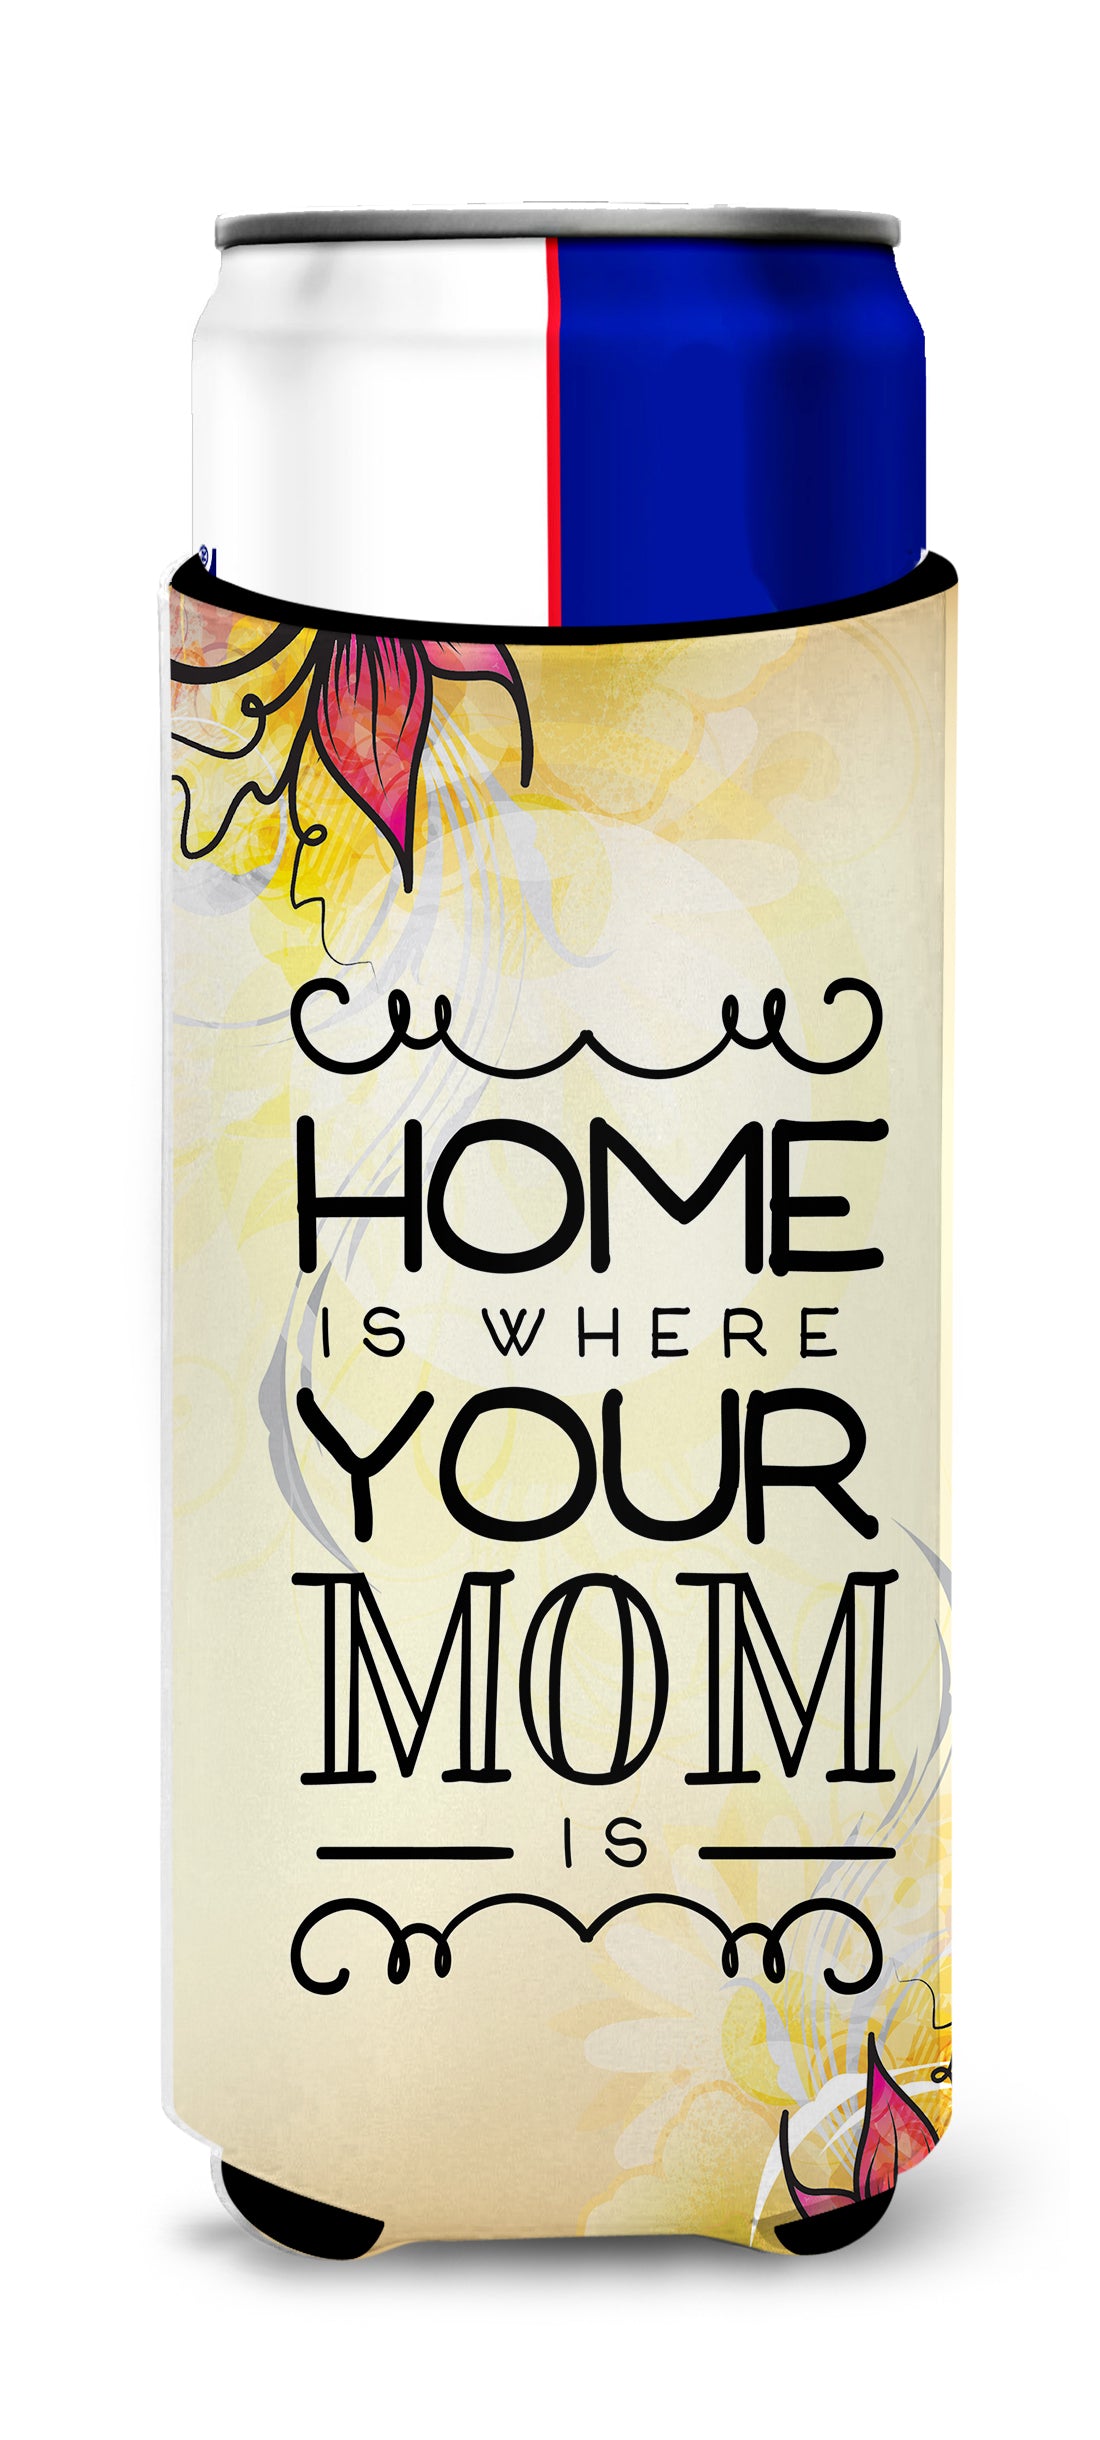 Home is Where Mom is  Ultra Hugger for slim cans BB5416MUK